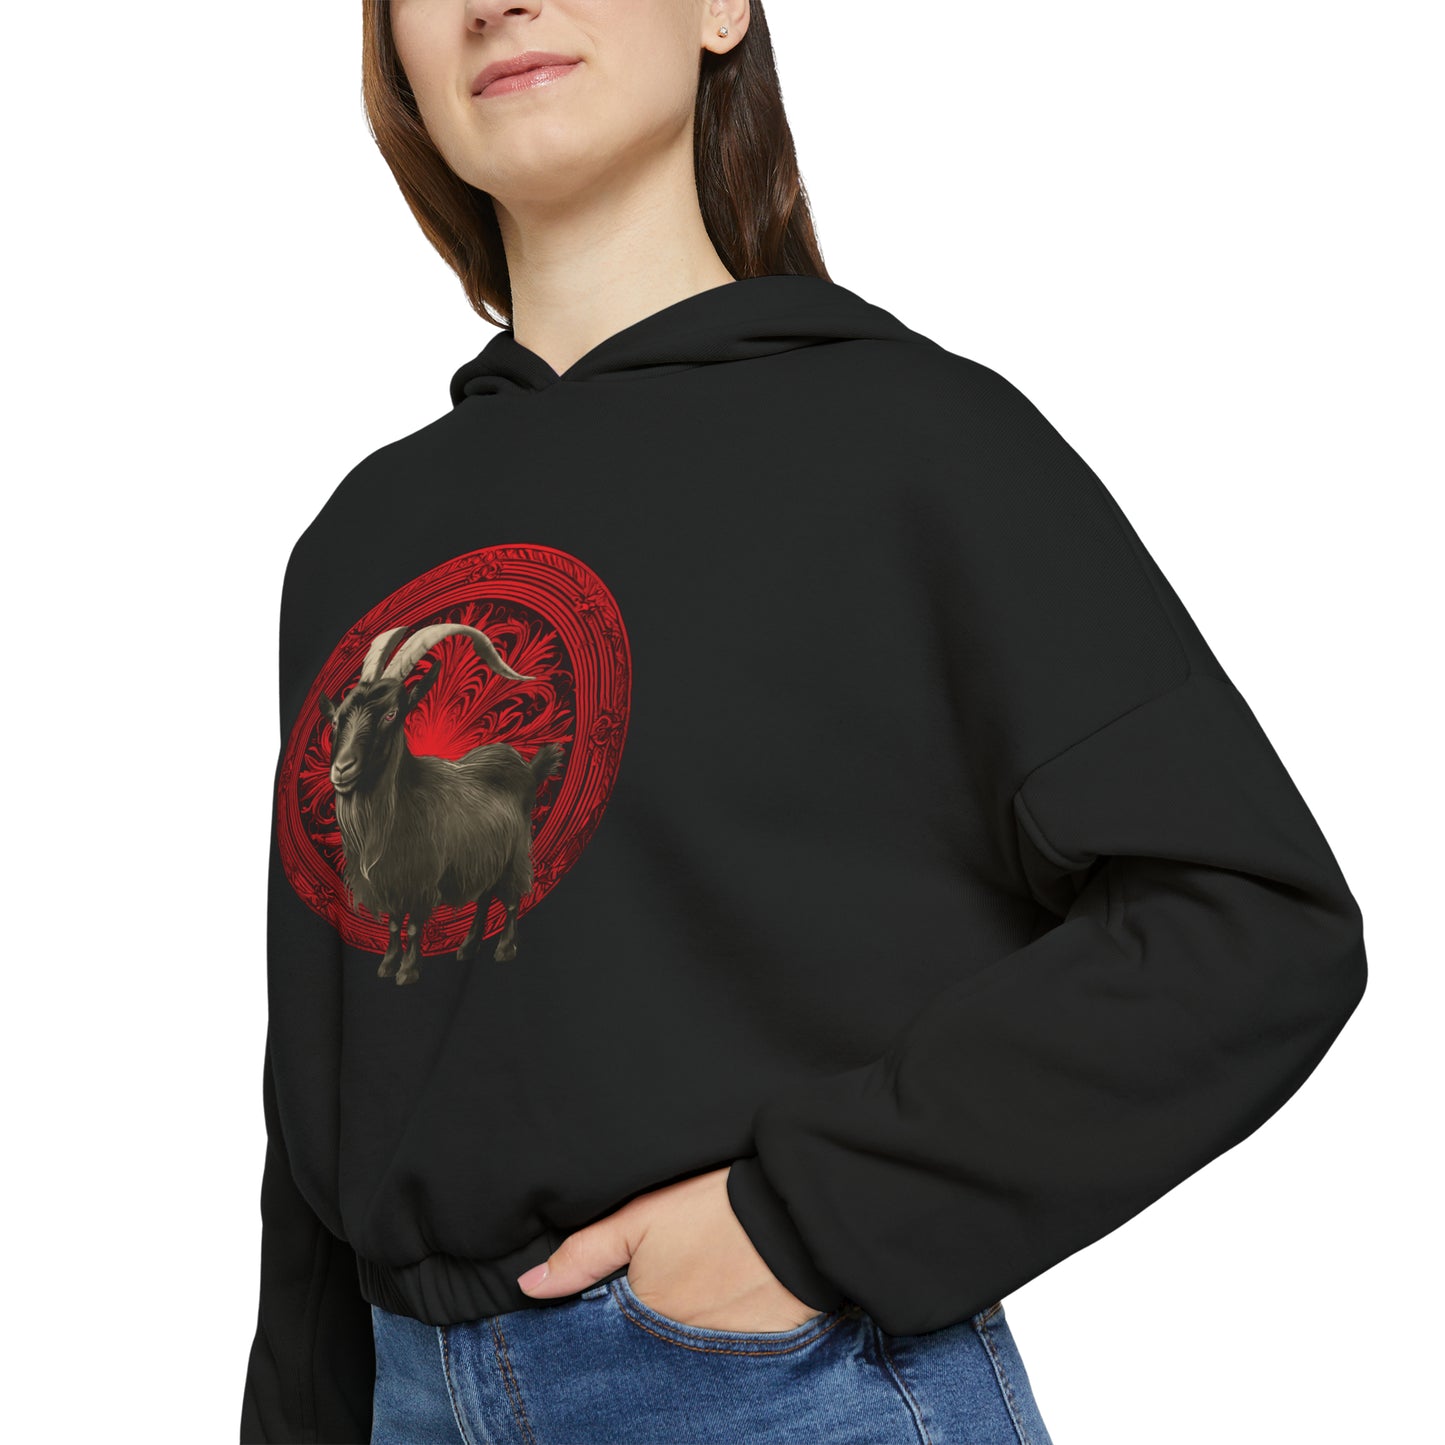 The Witch's Movie Coven Women's Cinched Bottom Hoodie